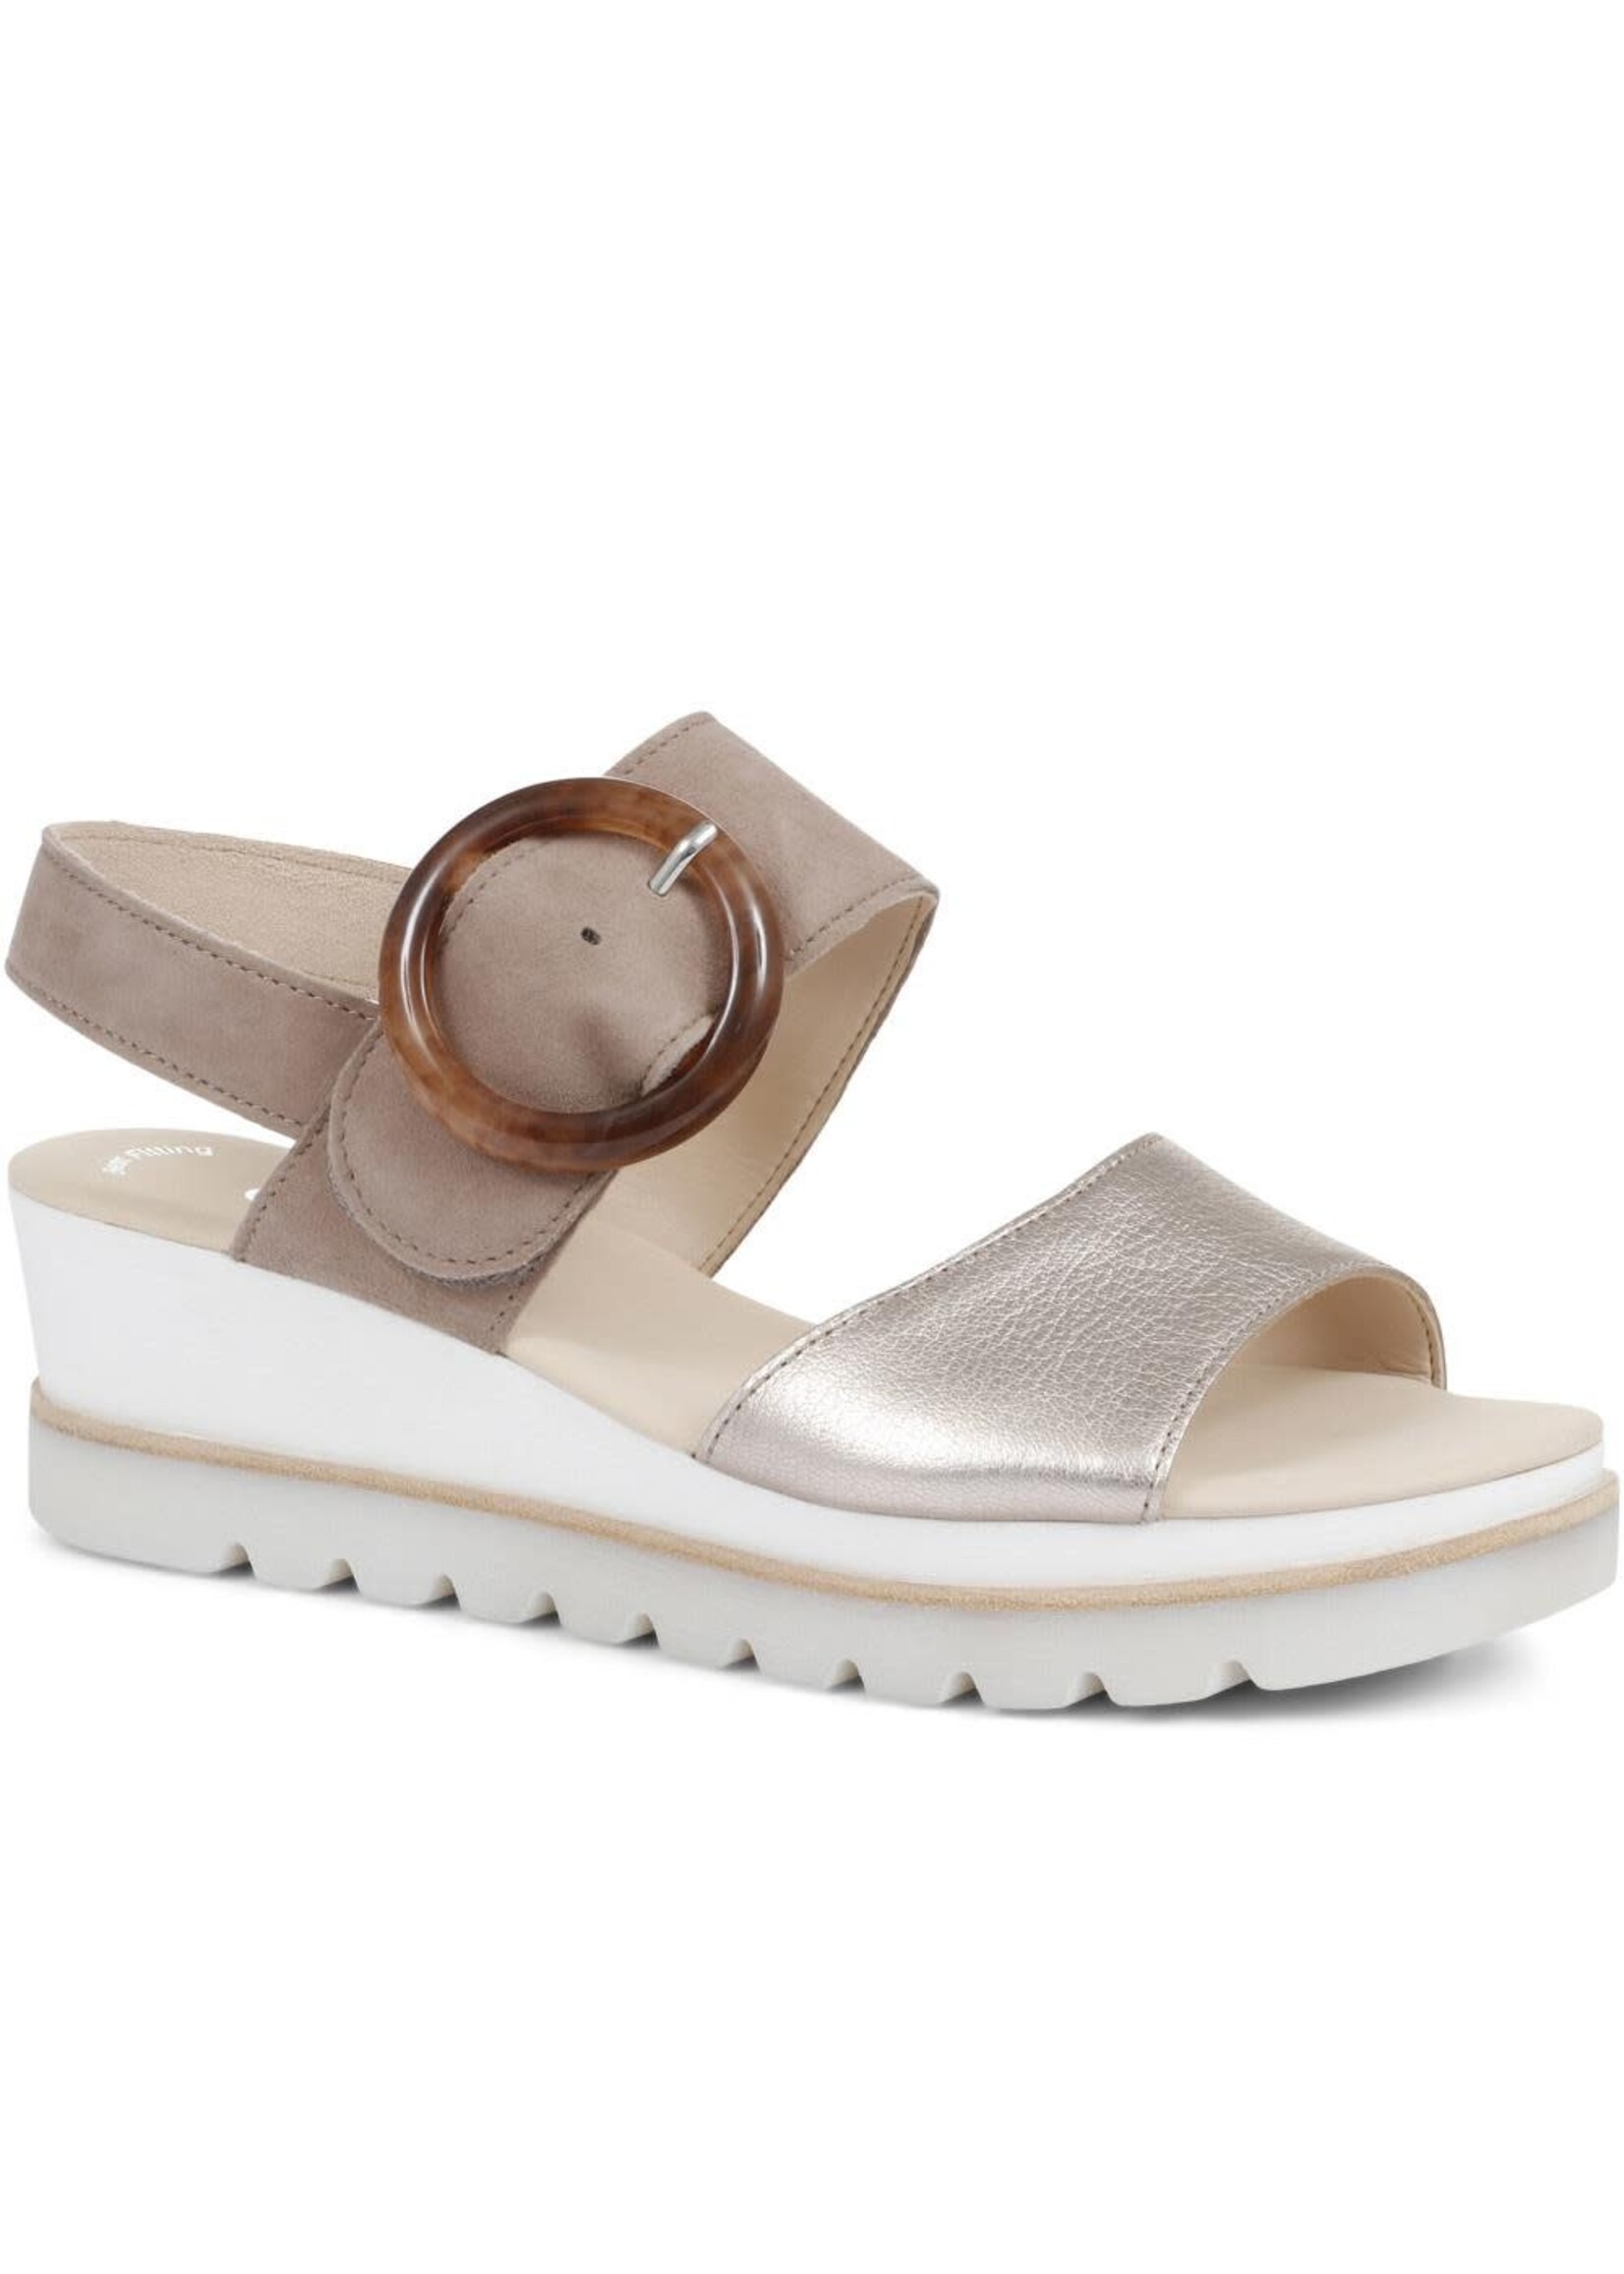 Gabor Kate Wedge in Pewter Leather Taupe Suede by Gabor